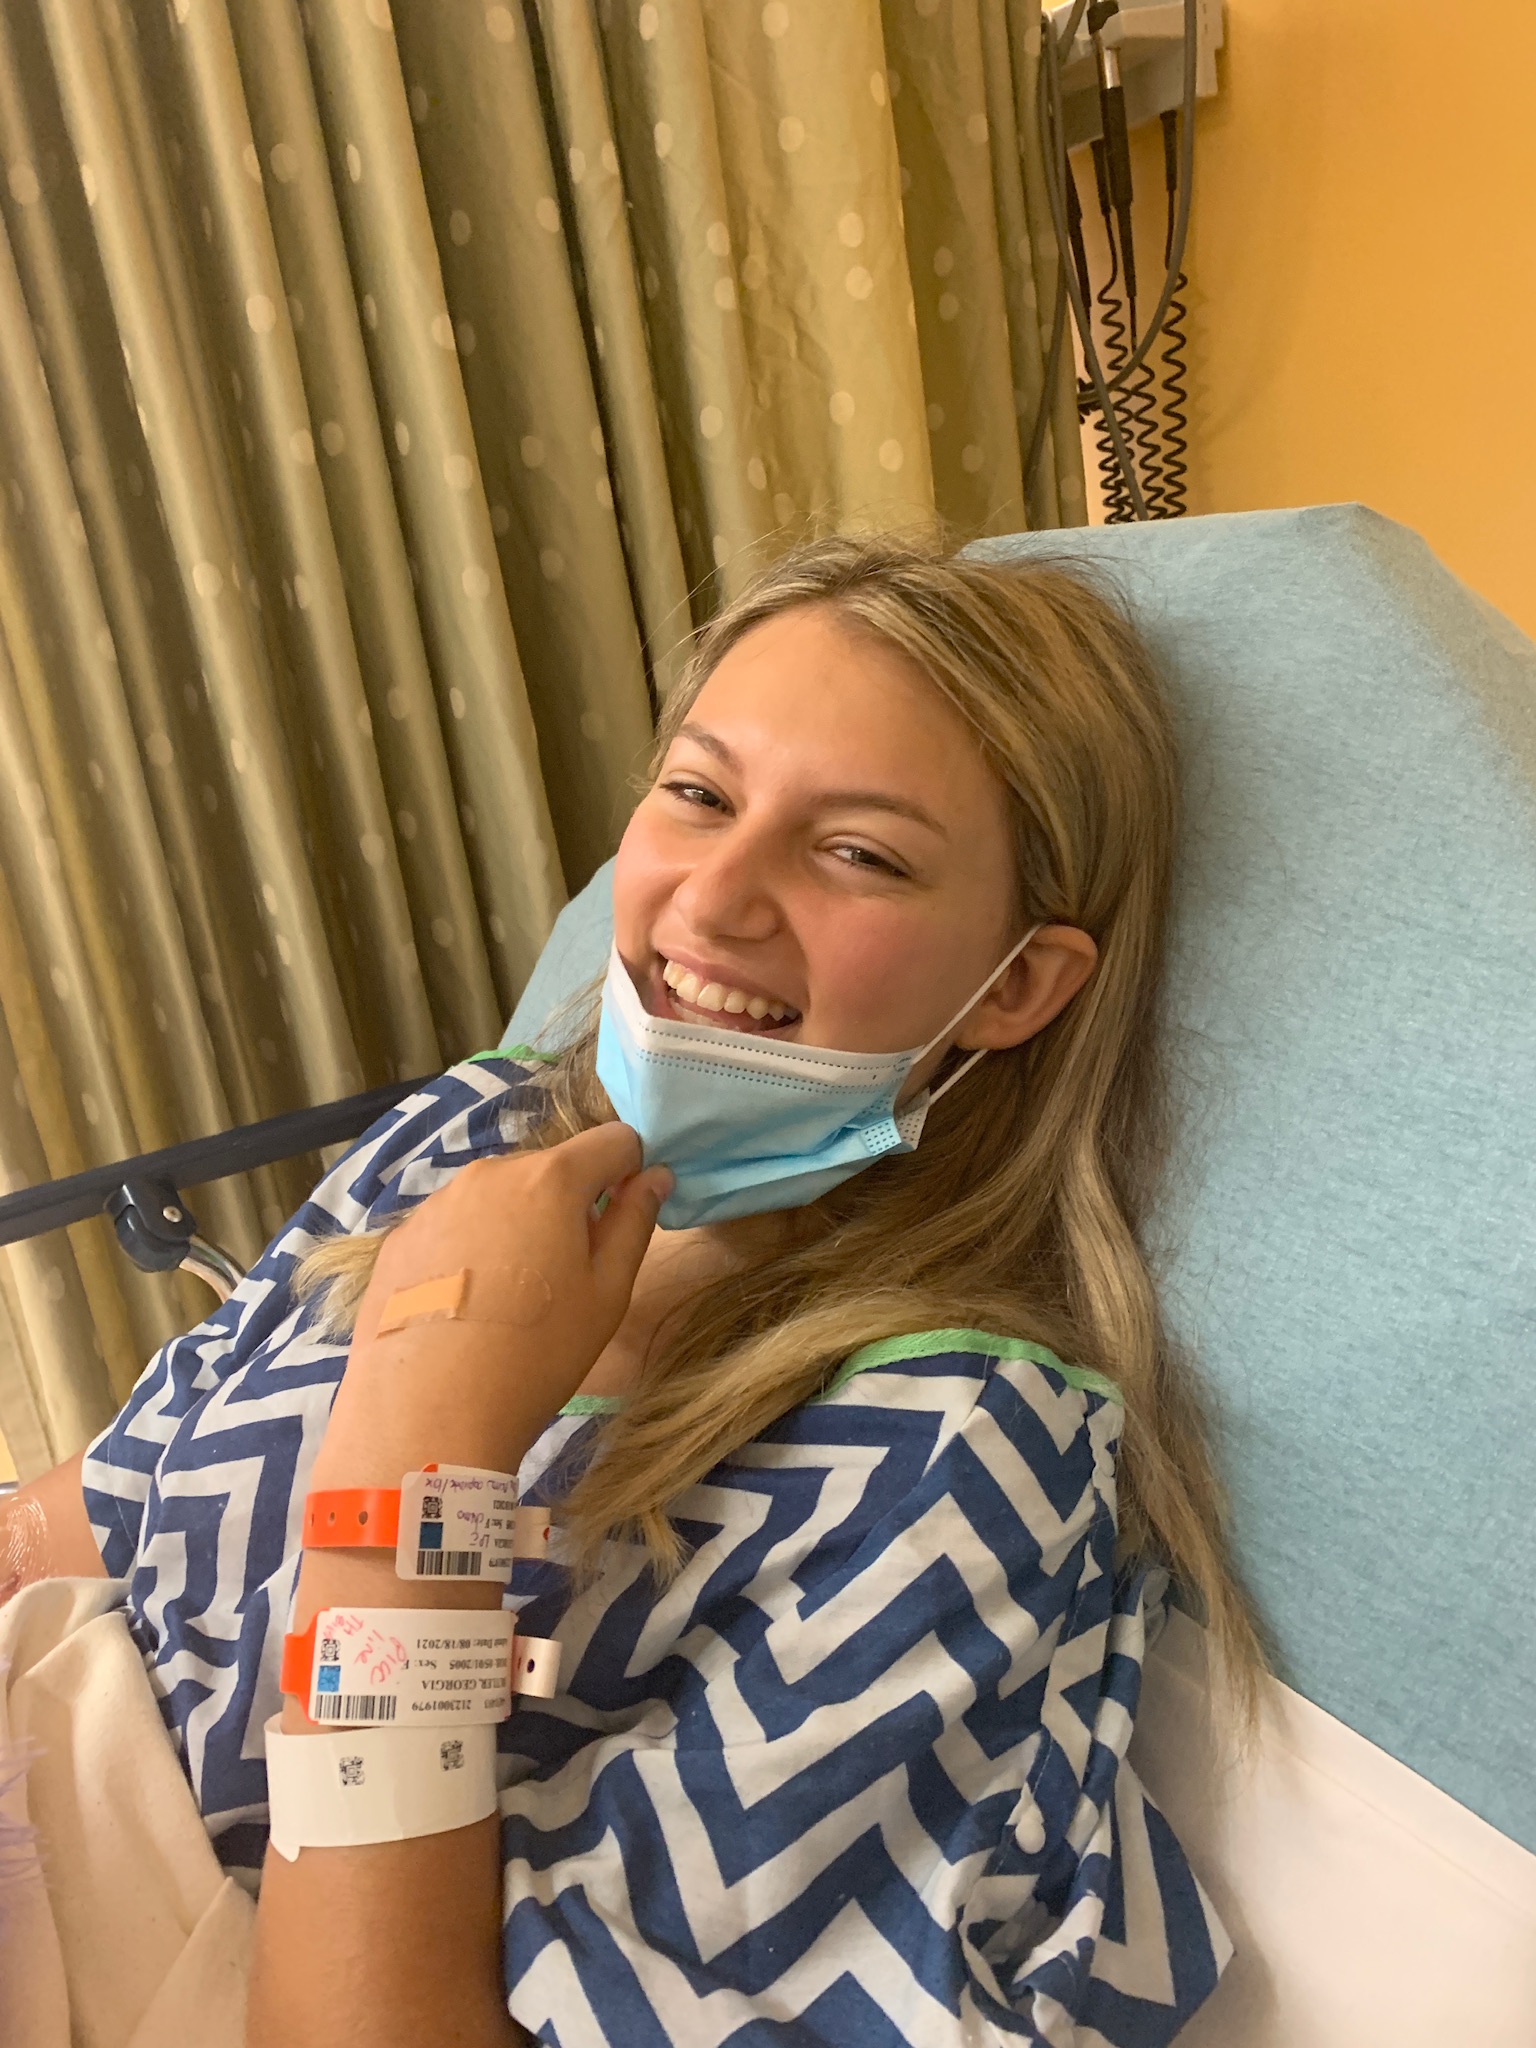 Blonde teen girl with leukemia in blue and white medical gown pulling down a face mask